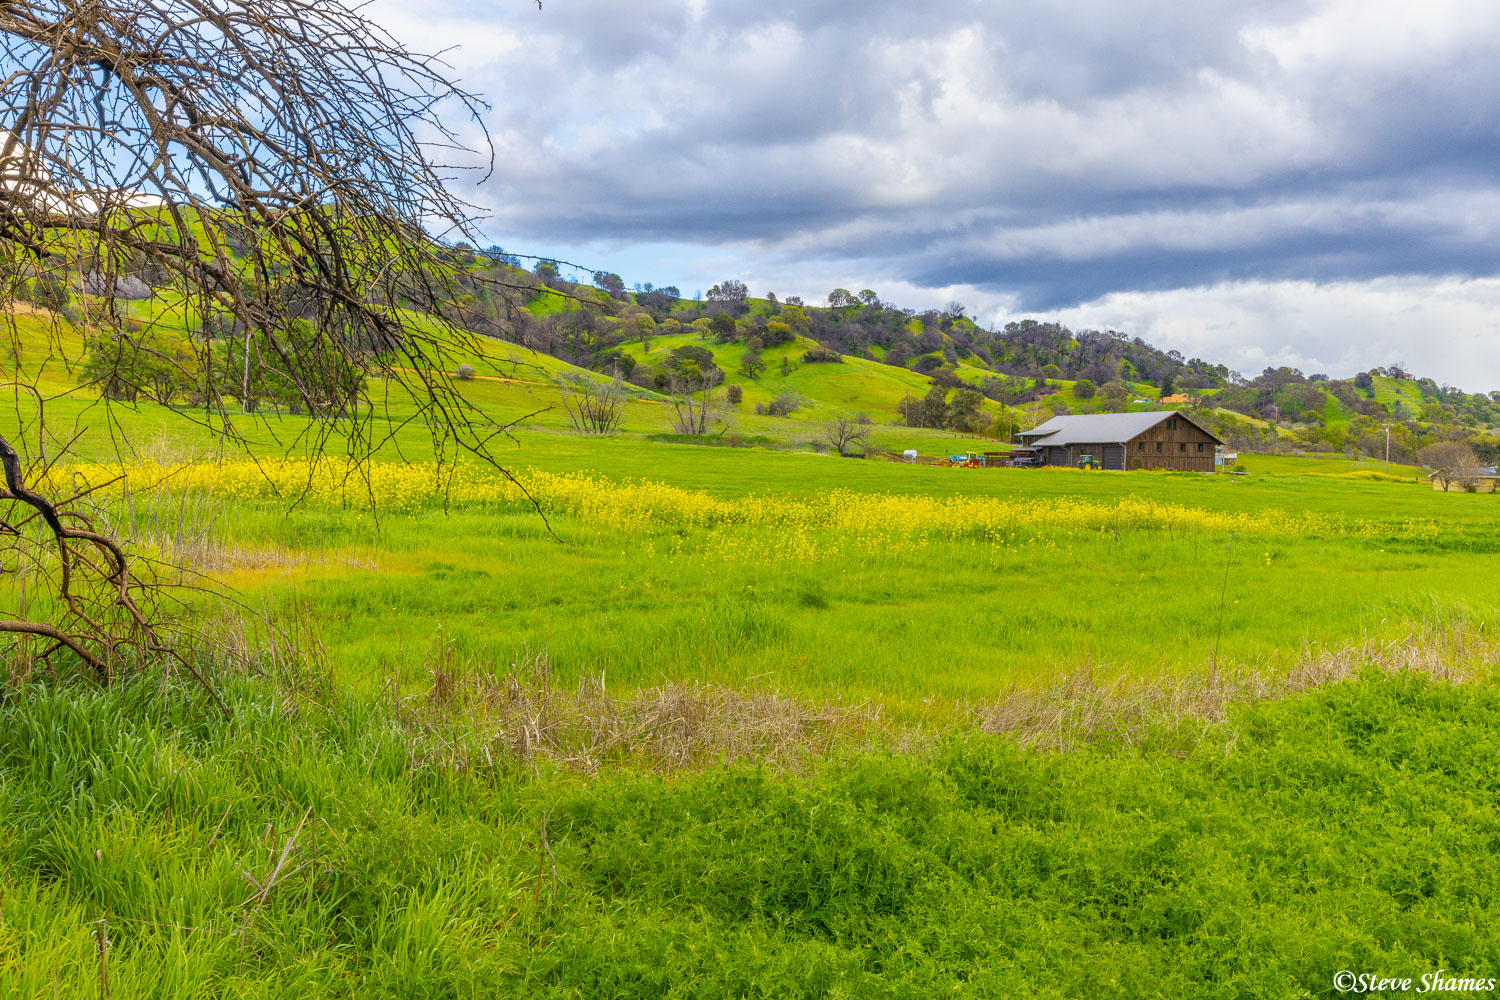 A pleasant spring scene along Pleasants Valley Road in Solano County.